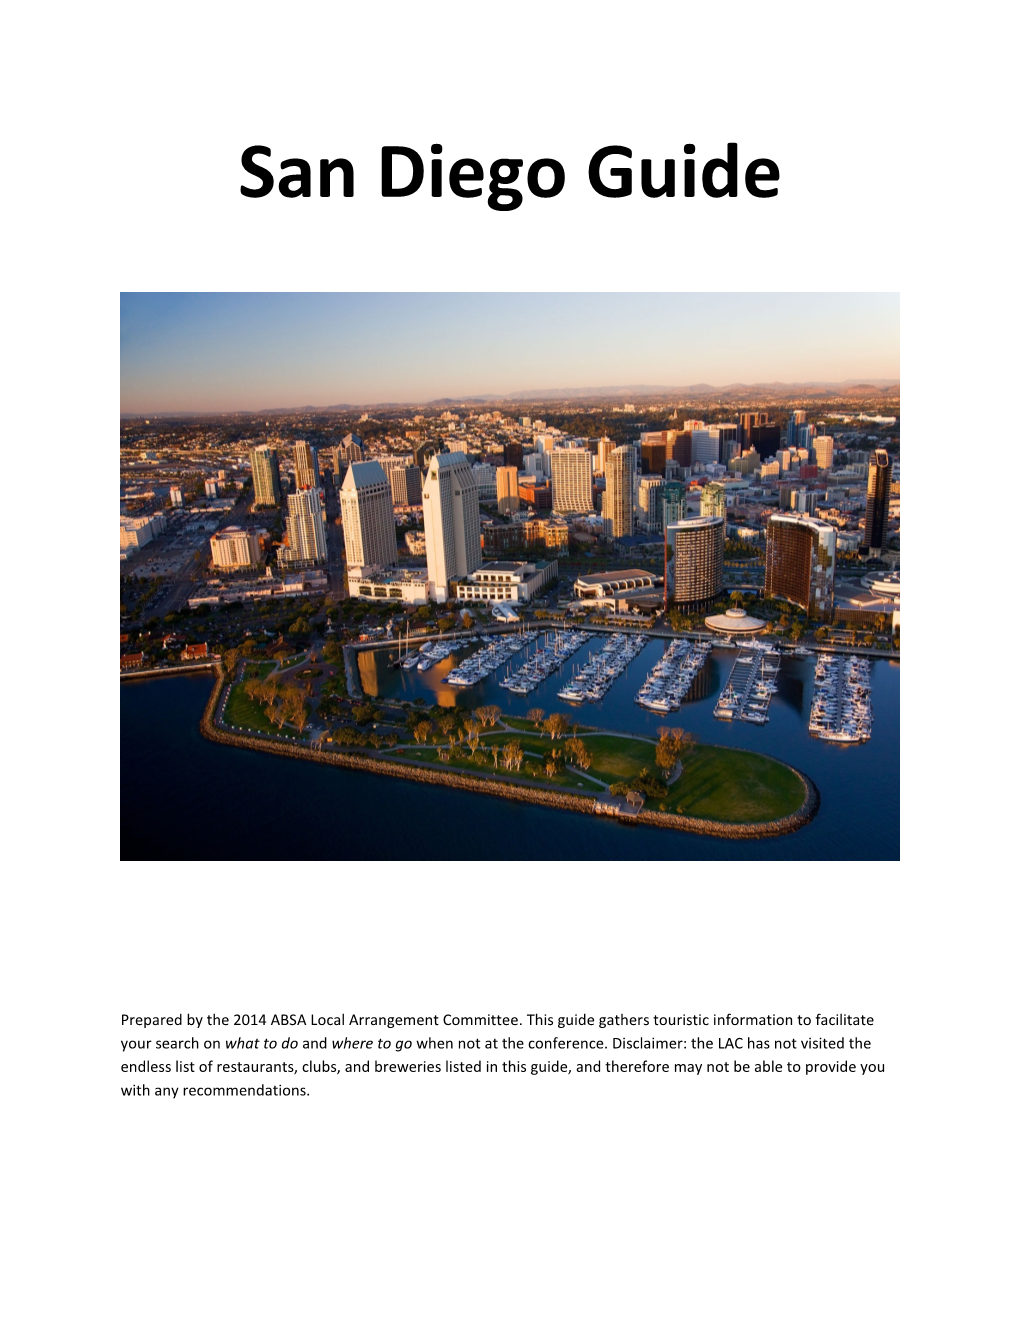 San Diego Guide